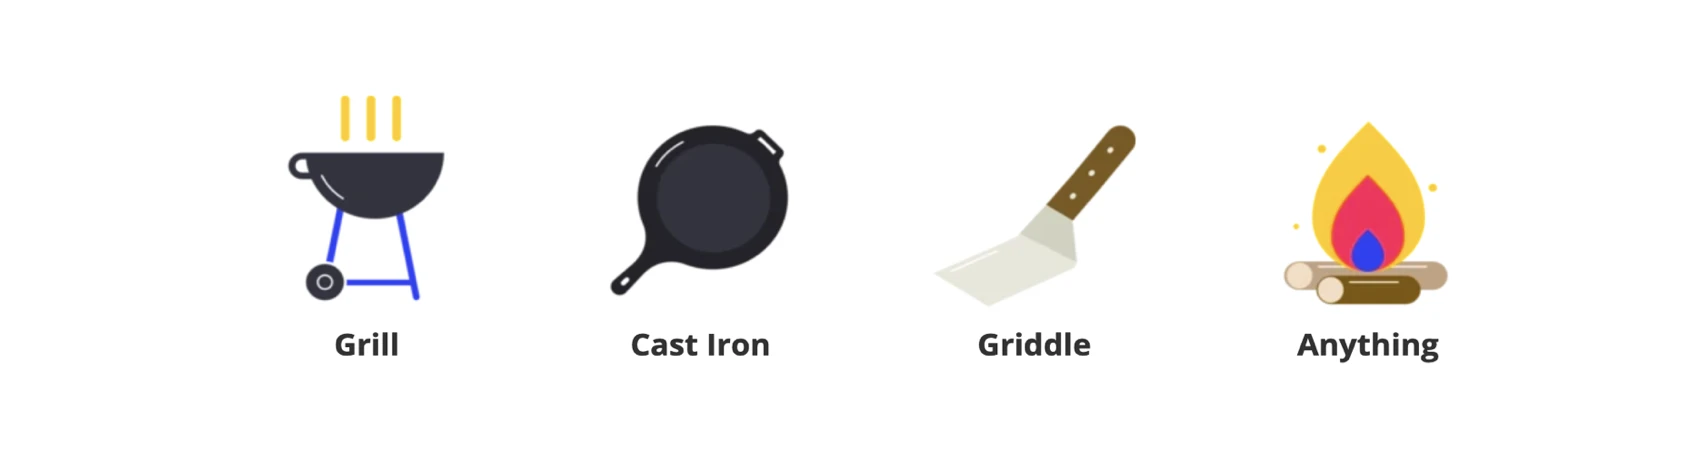 image of illustrations of a Grill, Cast Iron, Griddle, or Anything like on a campfire.